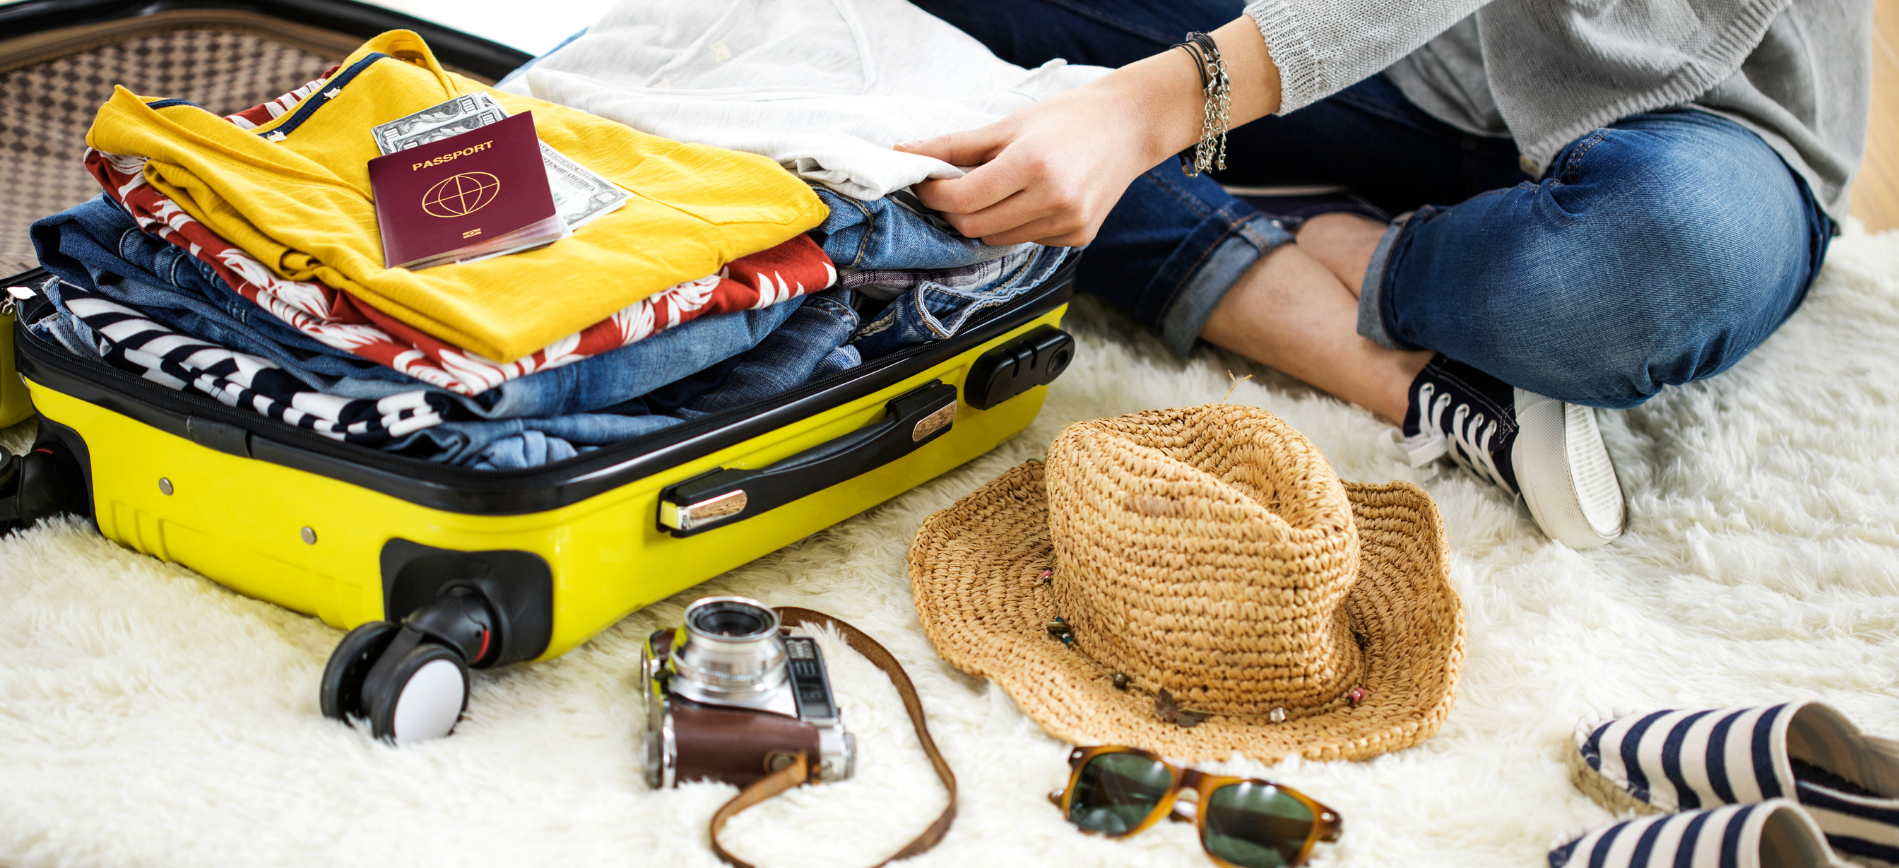 Travelling? Don't Forget to Pack Travel Insurance!